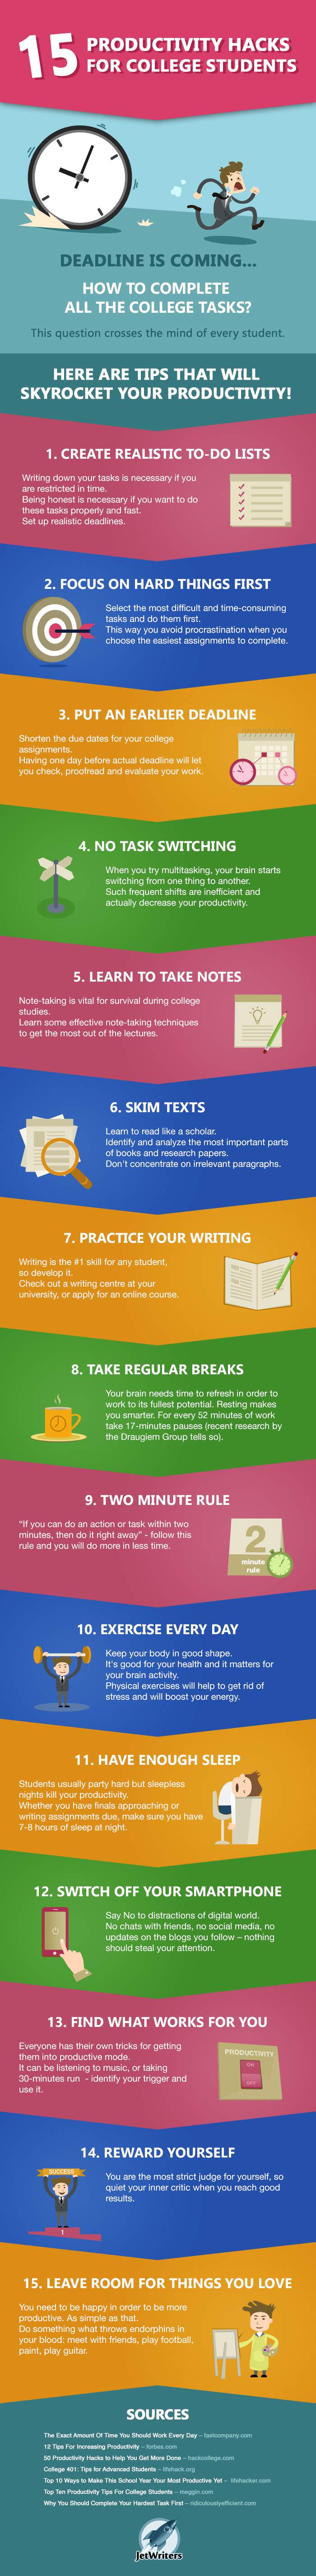 15 Productivity Hacks For College Students